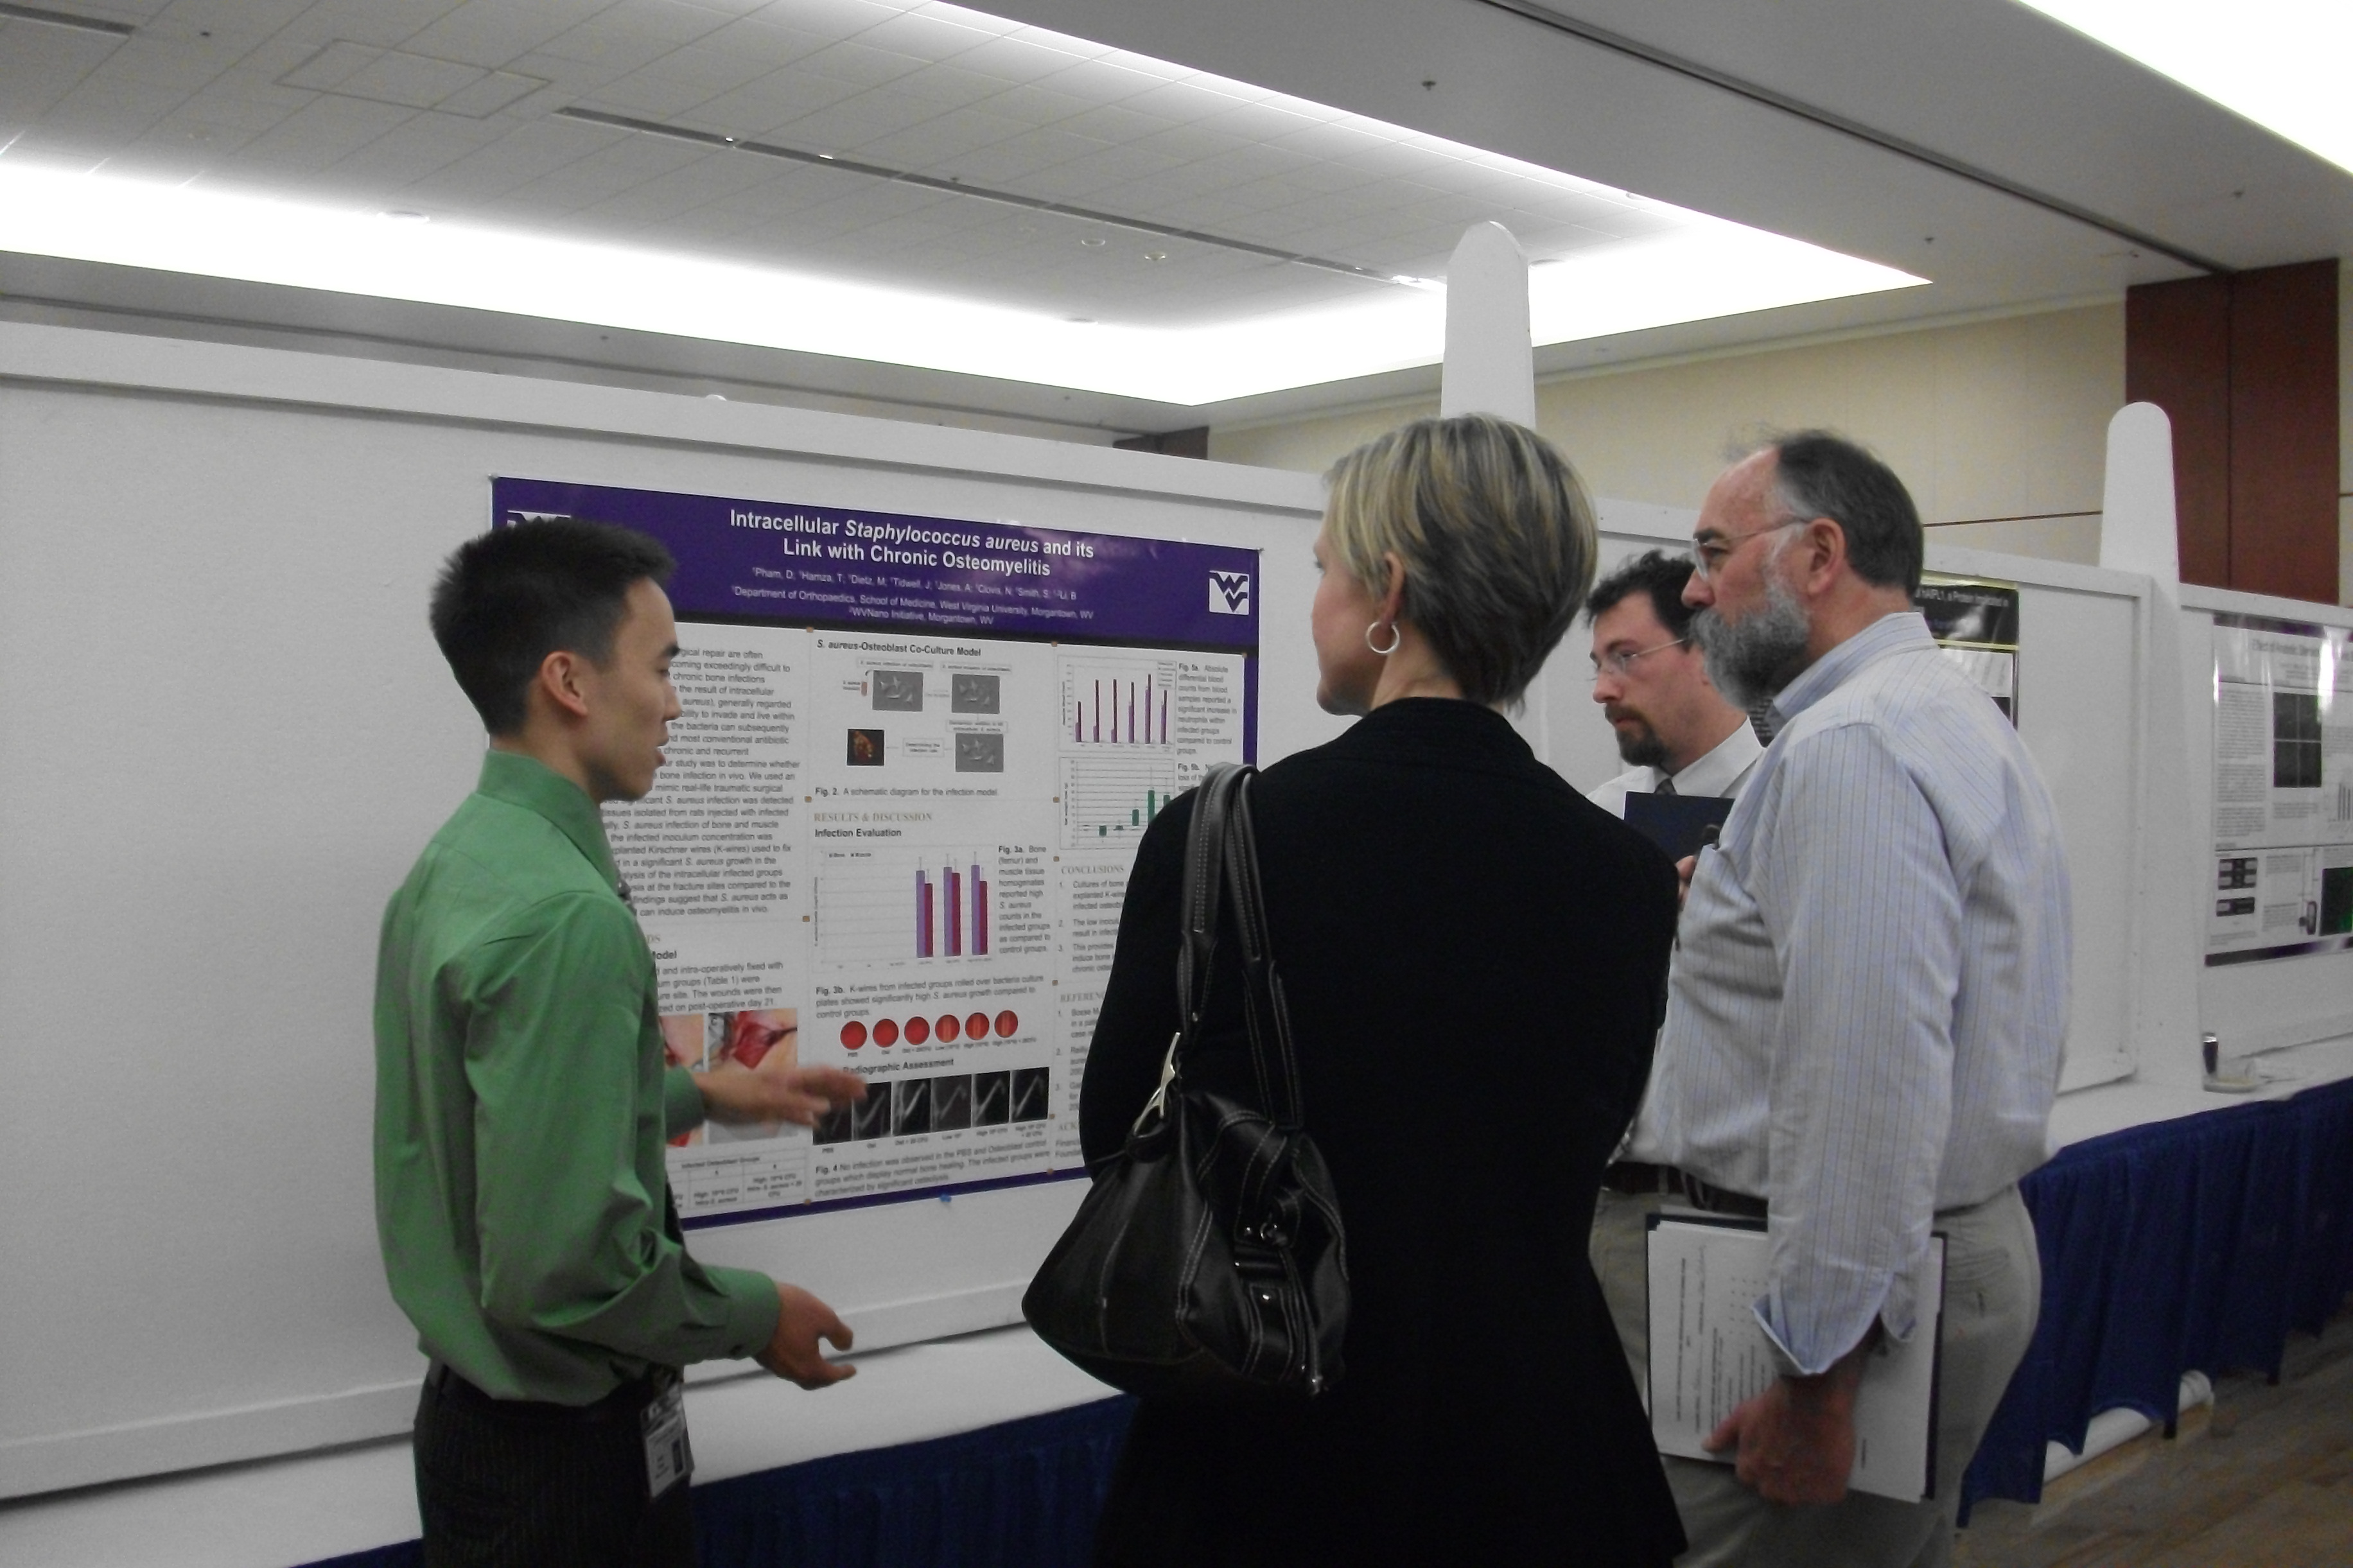 Danh Pham (MD student), standing with his poster, received the Second Place MD Poster Prize at the Van Liere Research Day